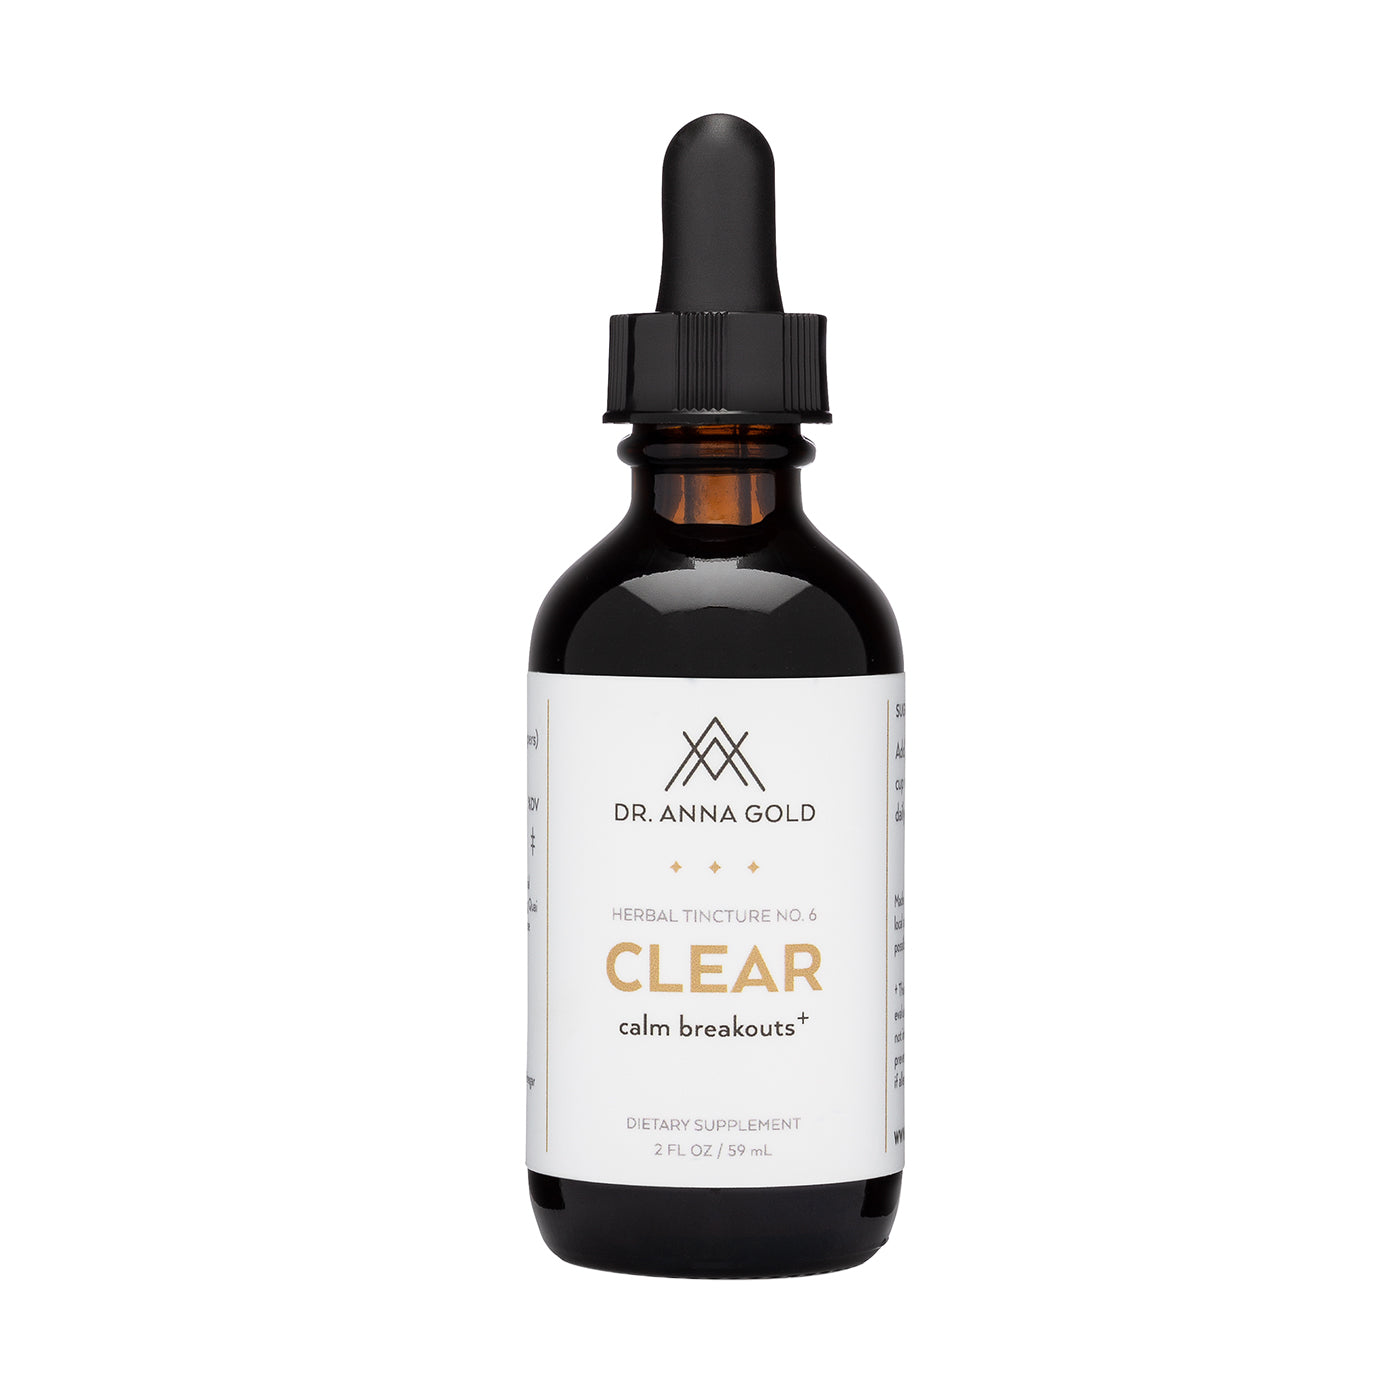 Dr. Anna Gold Clear Tincture